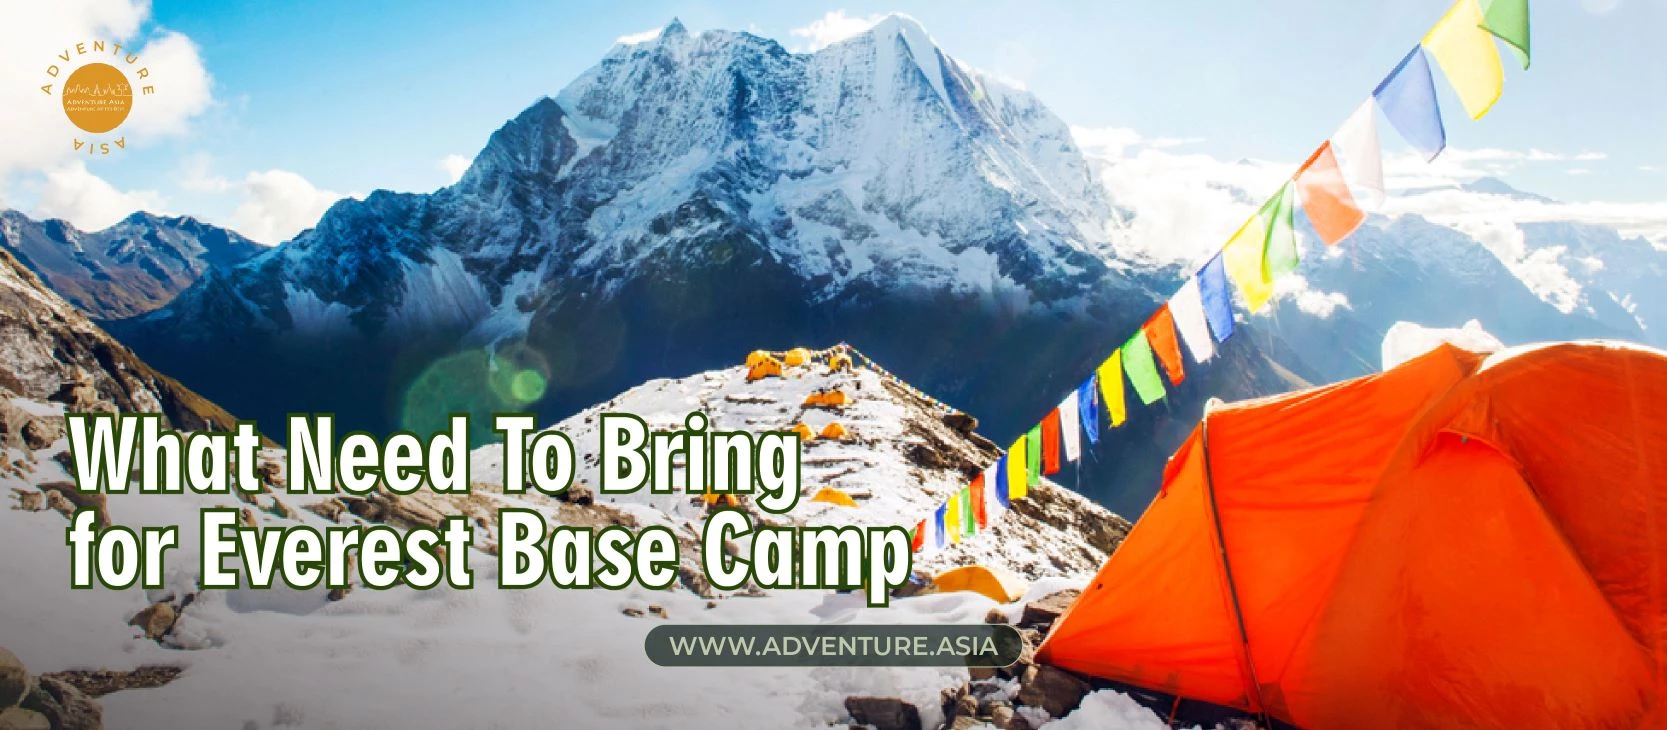 Exactly What You Need To Bring for the Greatness Everest Base Camp Tour